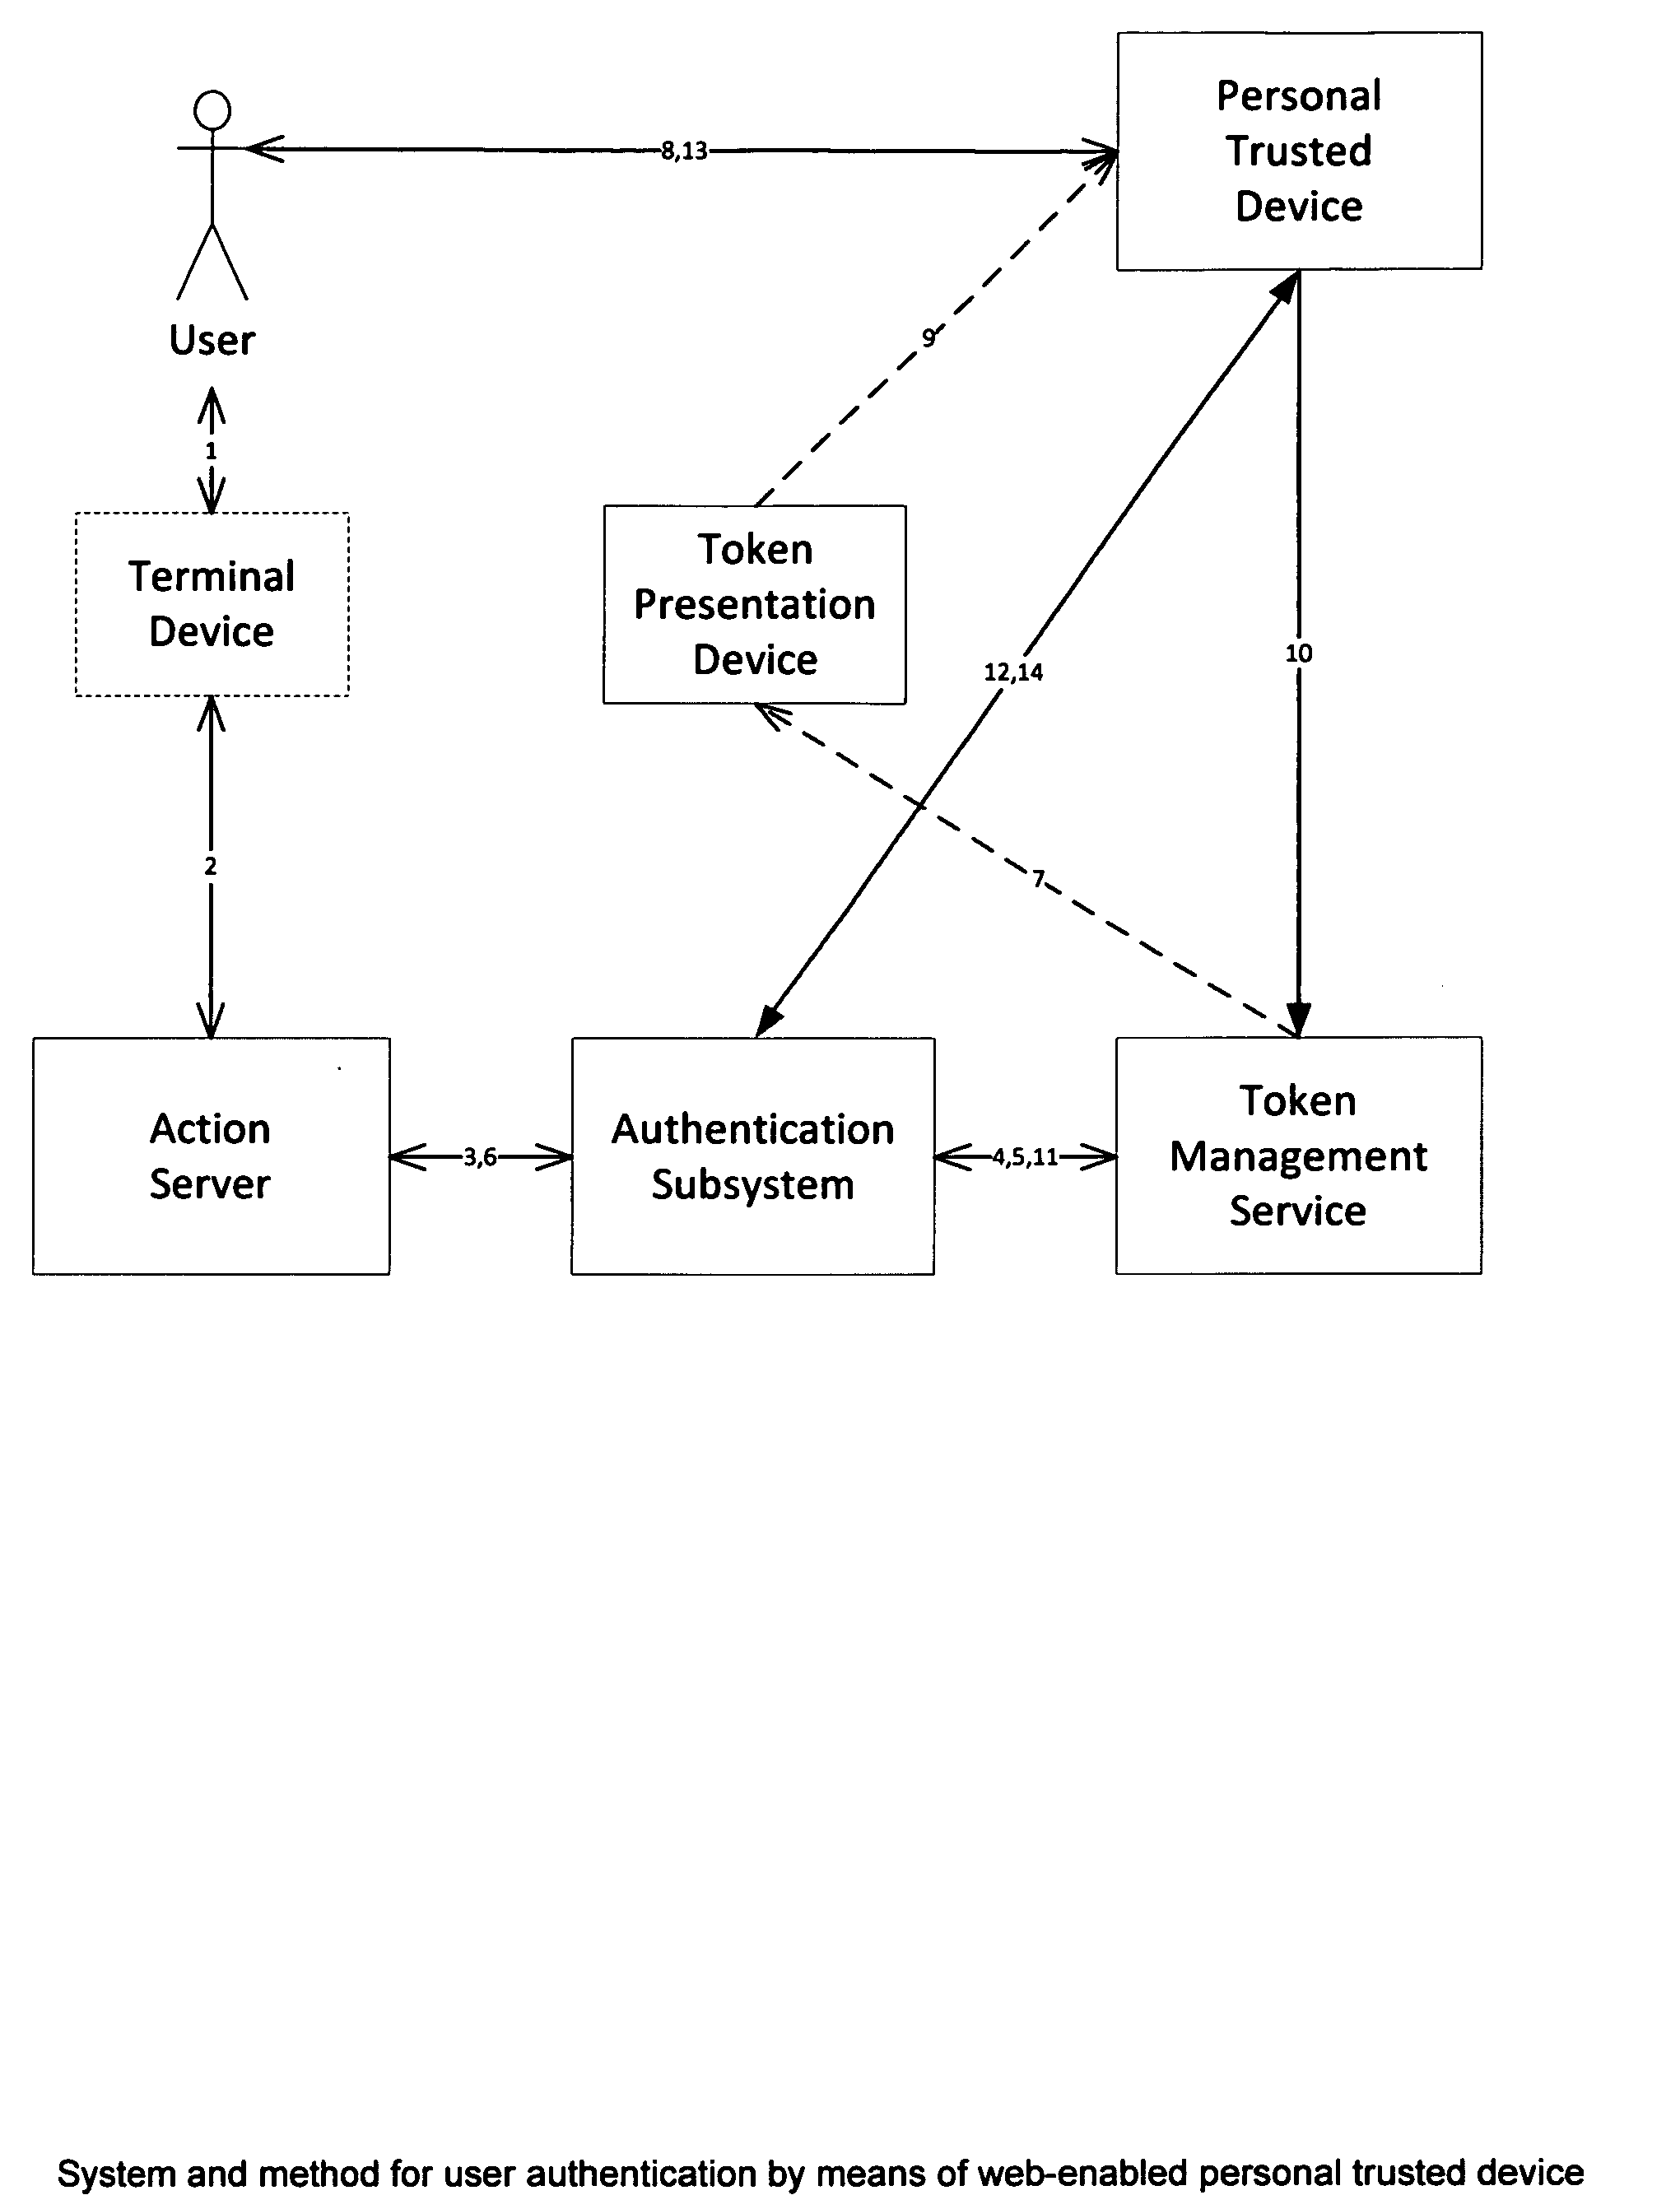 System and method for user authentication by means of web-enabled personal trusted device